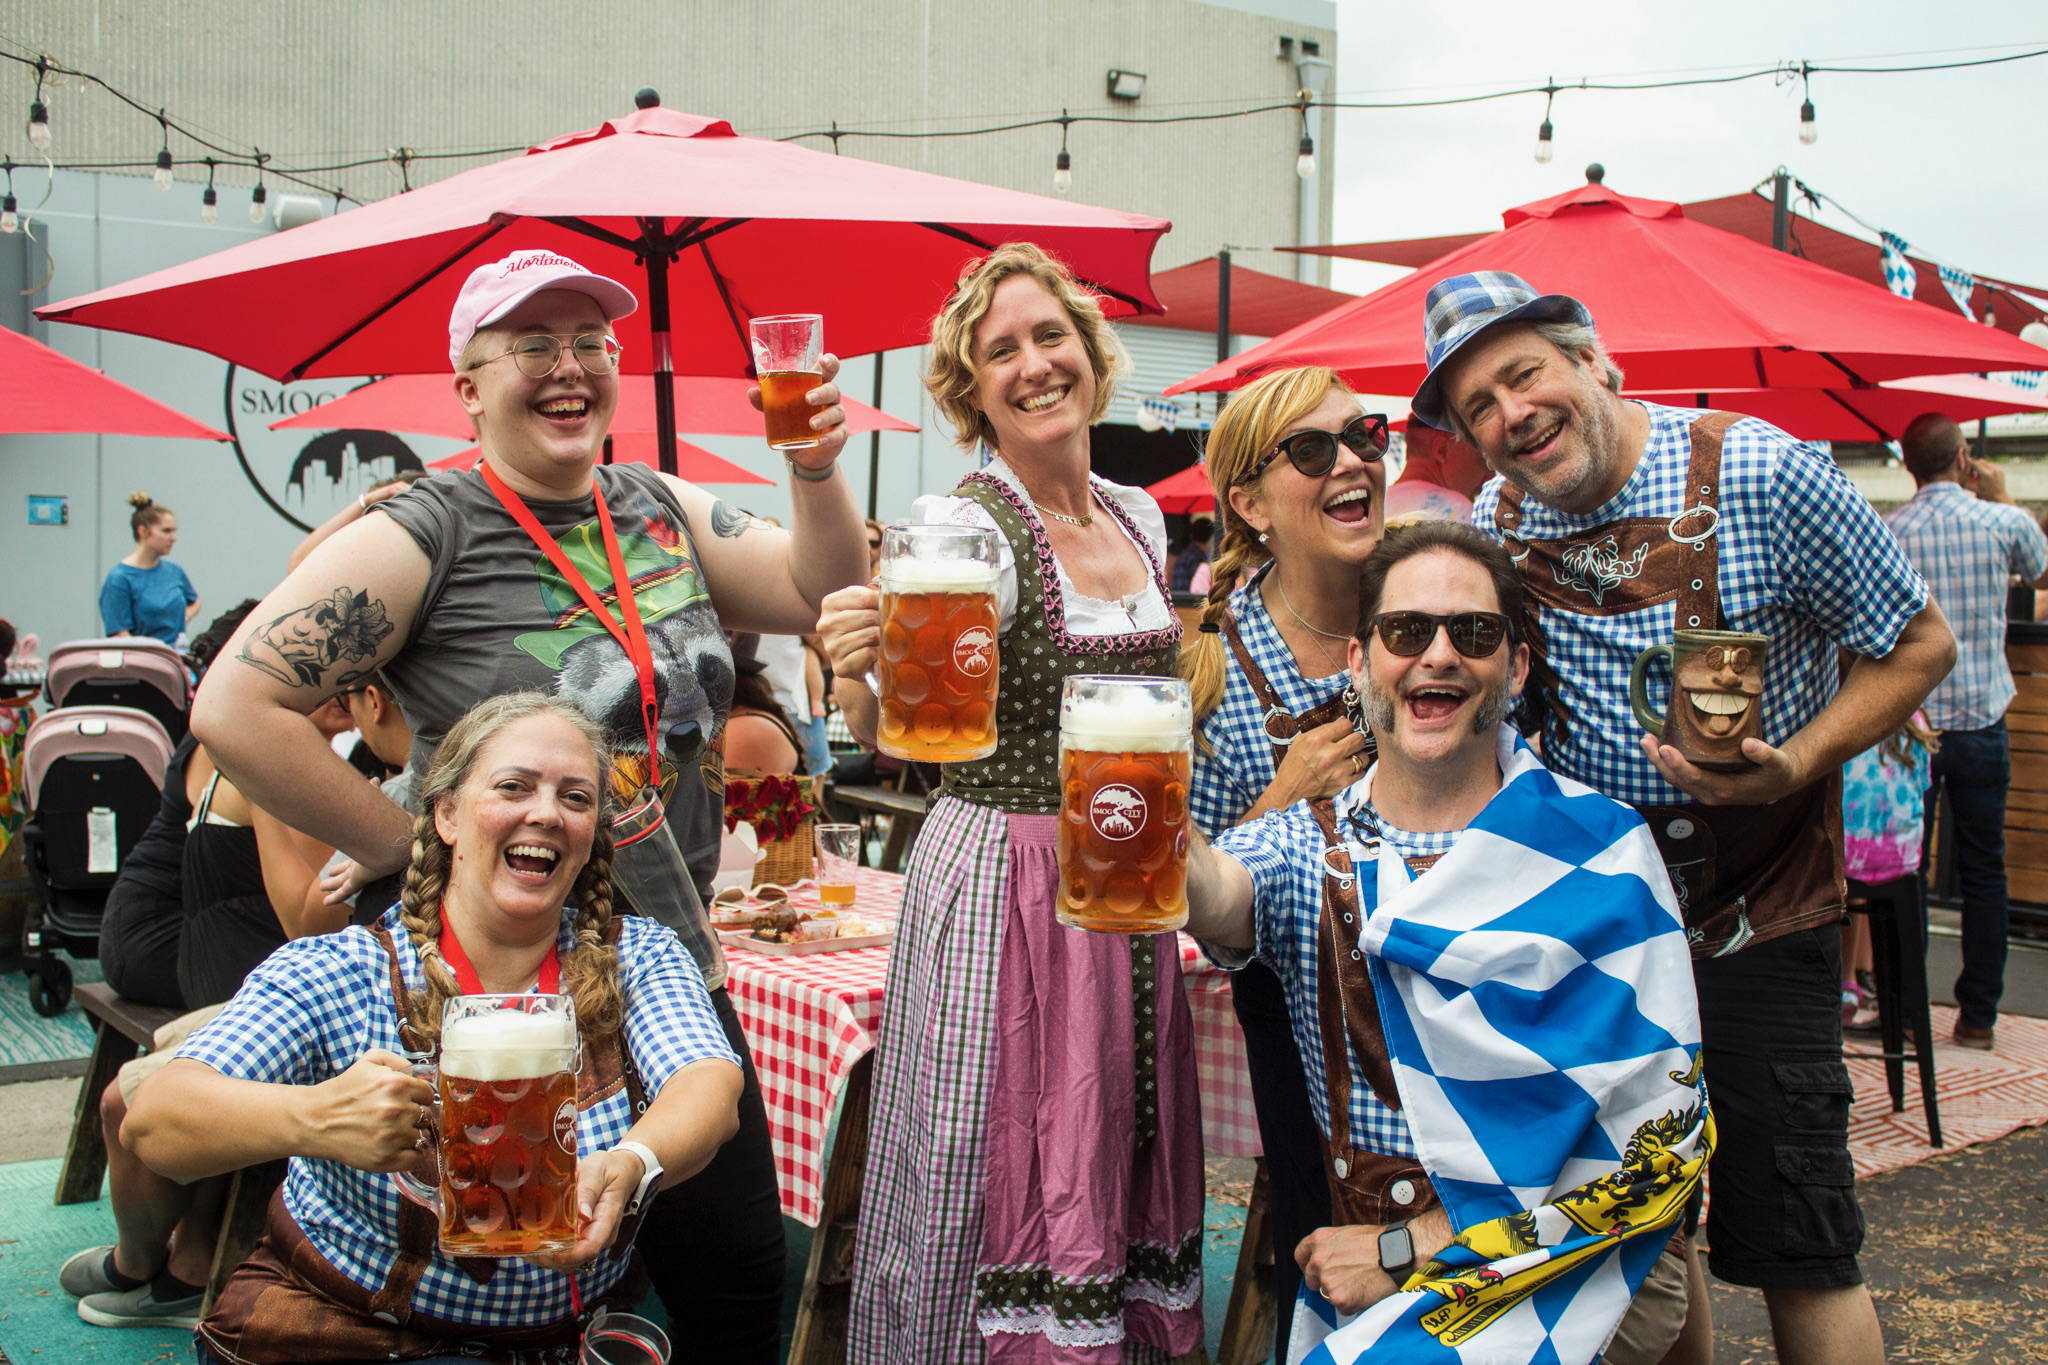 A group of people enjoying Smogtoberfest holding steins of beer and dressed in traditional Oktoberfest clothing.